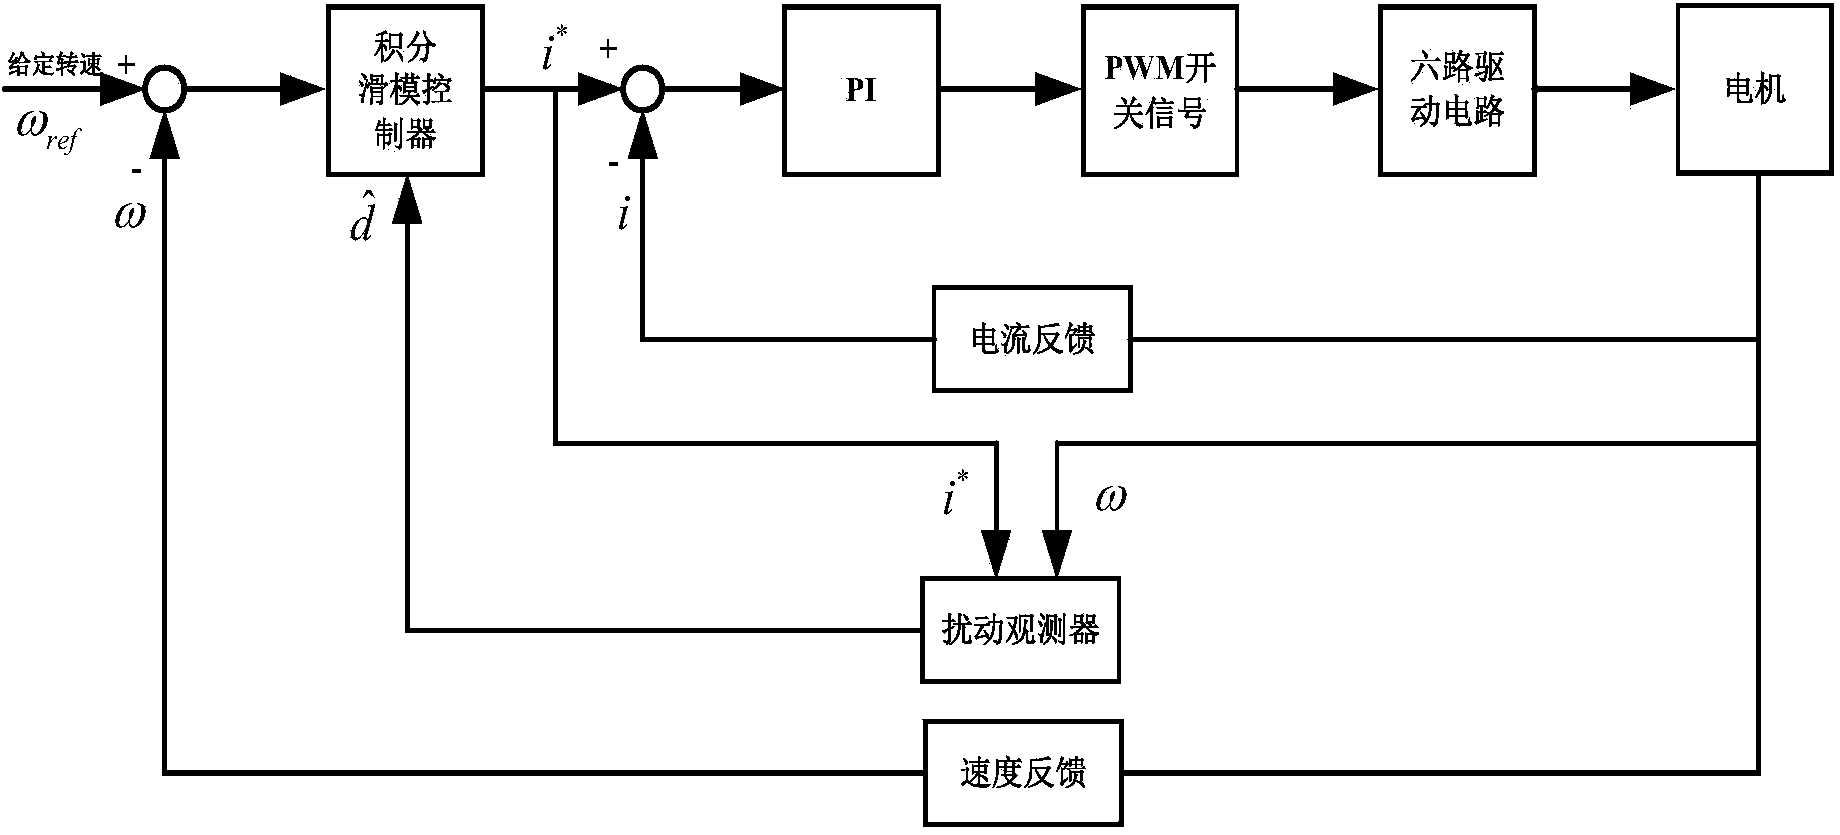 Electric bicycle control method based on integral sliding mode and disturbance observer